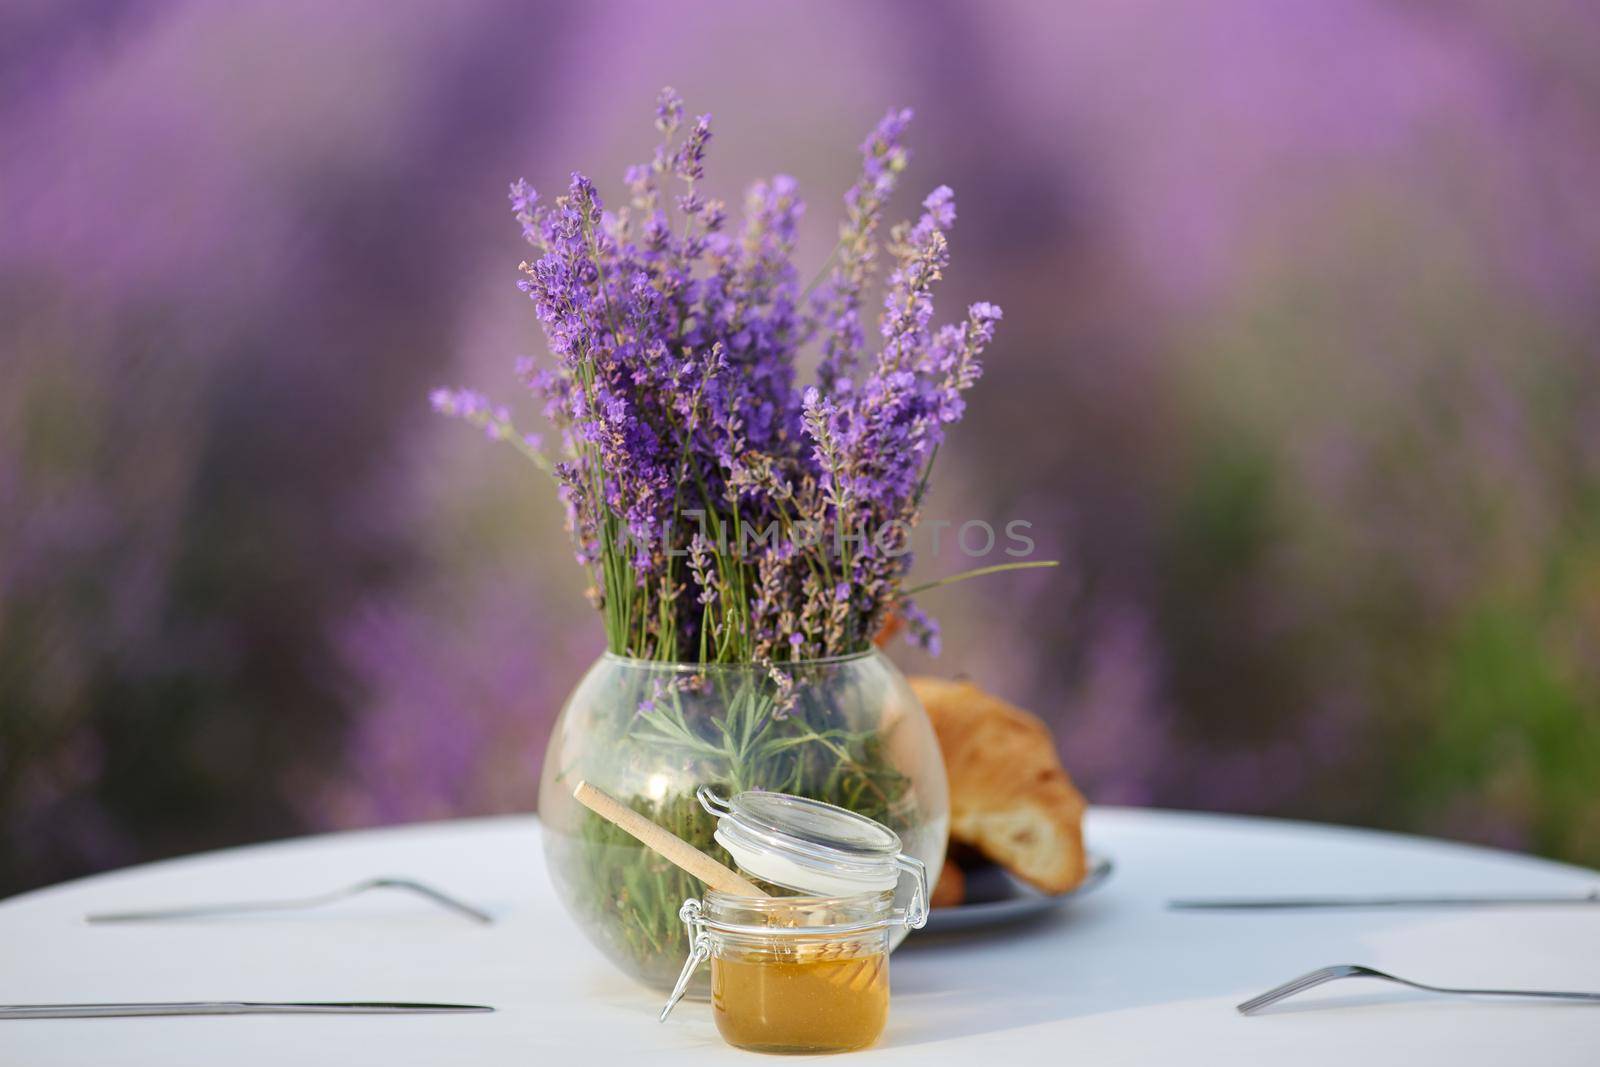 Croissants and honey on table in lavender field. by SerhiiBobyk